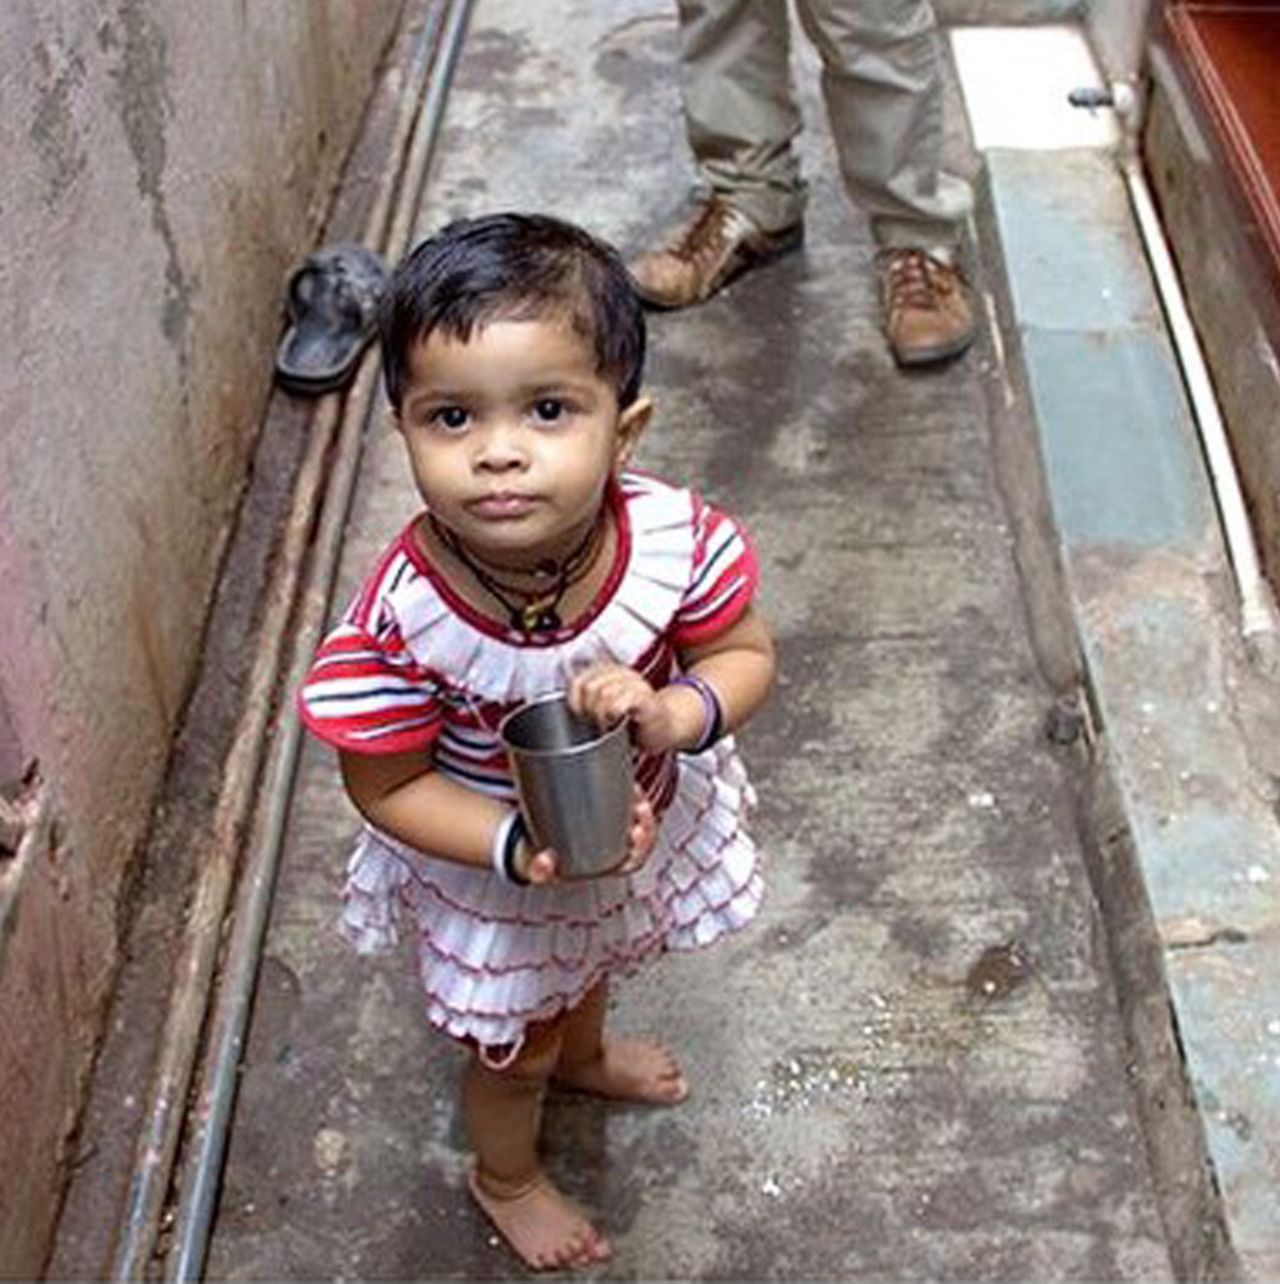 "This was probably one of the most heart warming <a href="https://instagram.com/officialhumansofbombay/" target="_blank" target="_blank">moments</a> from our shoot at Dharavi (Mumbai's largest slum). Amidst the heat and lack of resources, this little girl looked up at me, smiled and said, "Didi, pani?" ("Water, sister?"). I guess it's because she's from one of the most hospitable places I've been to in the city. It was so overwhelming to have this little girl offer me water from her own glass, purely out of kindness." 